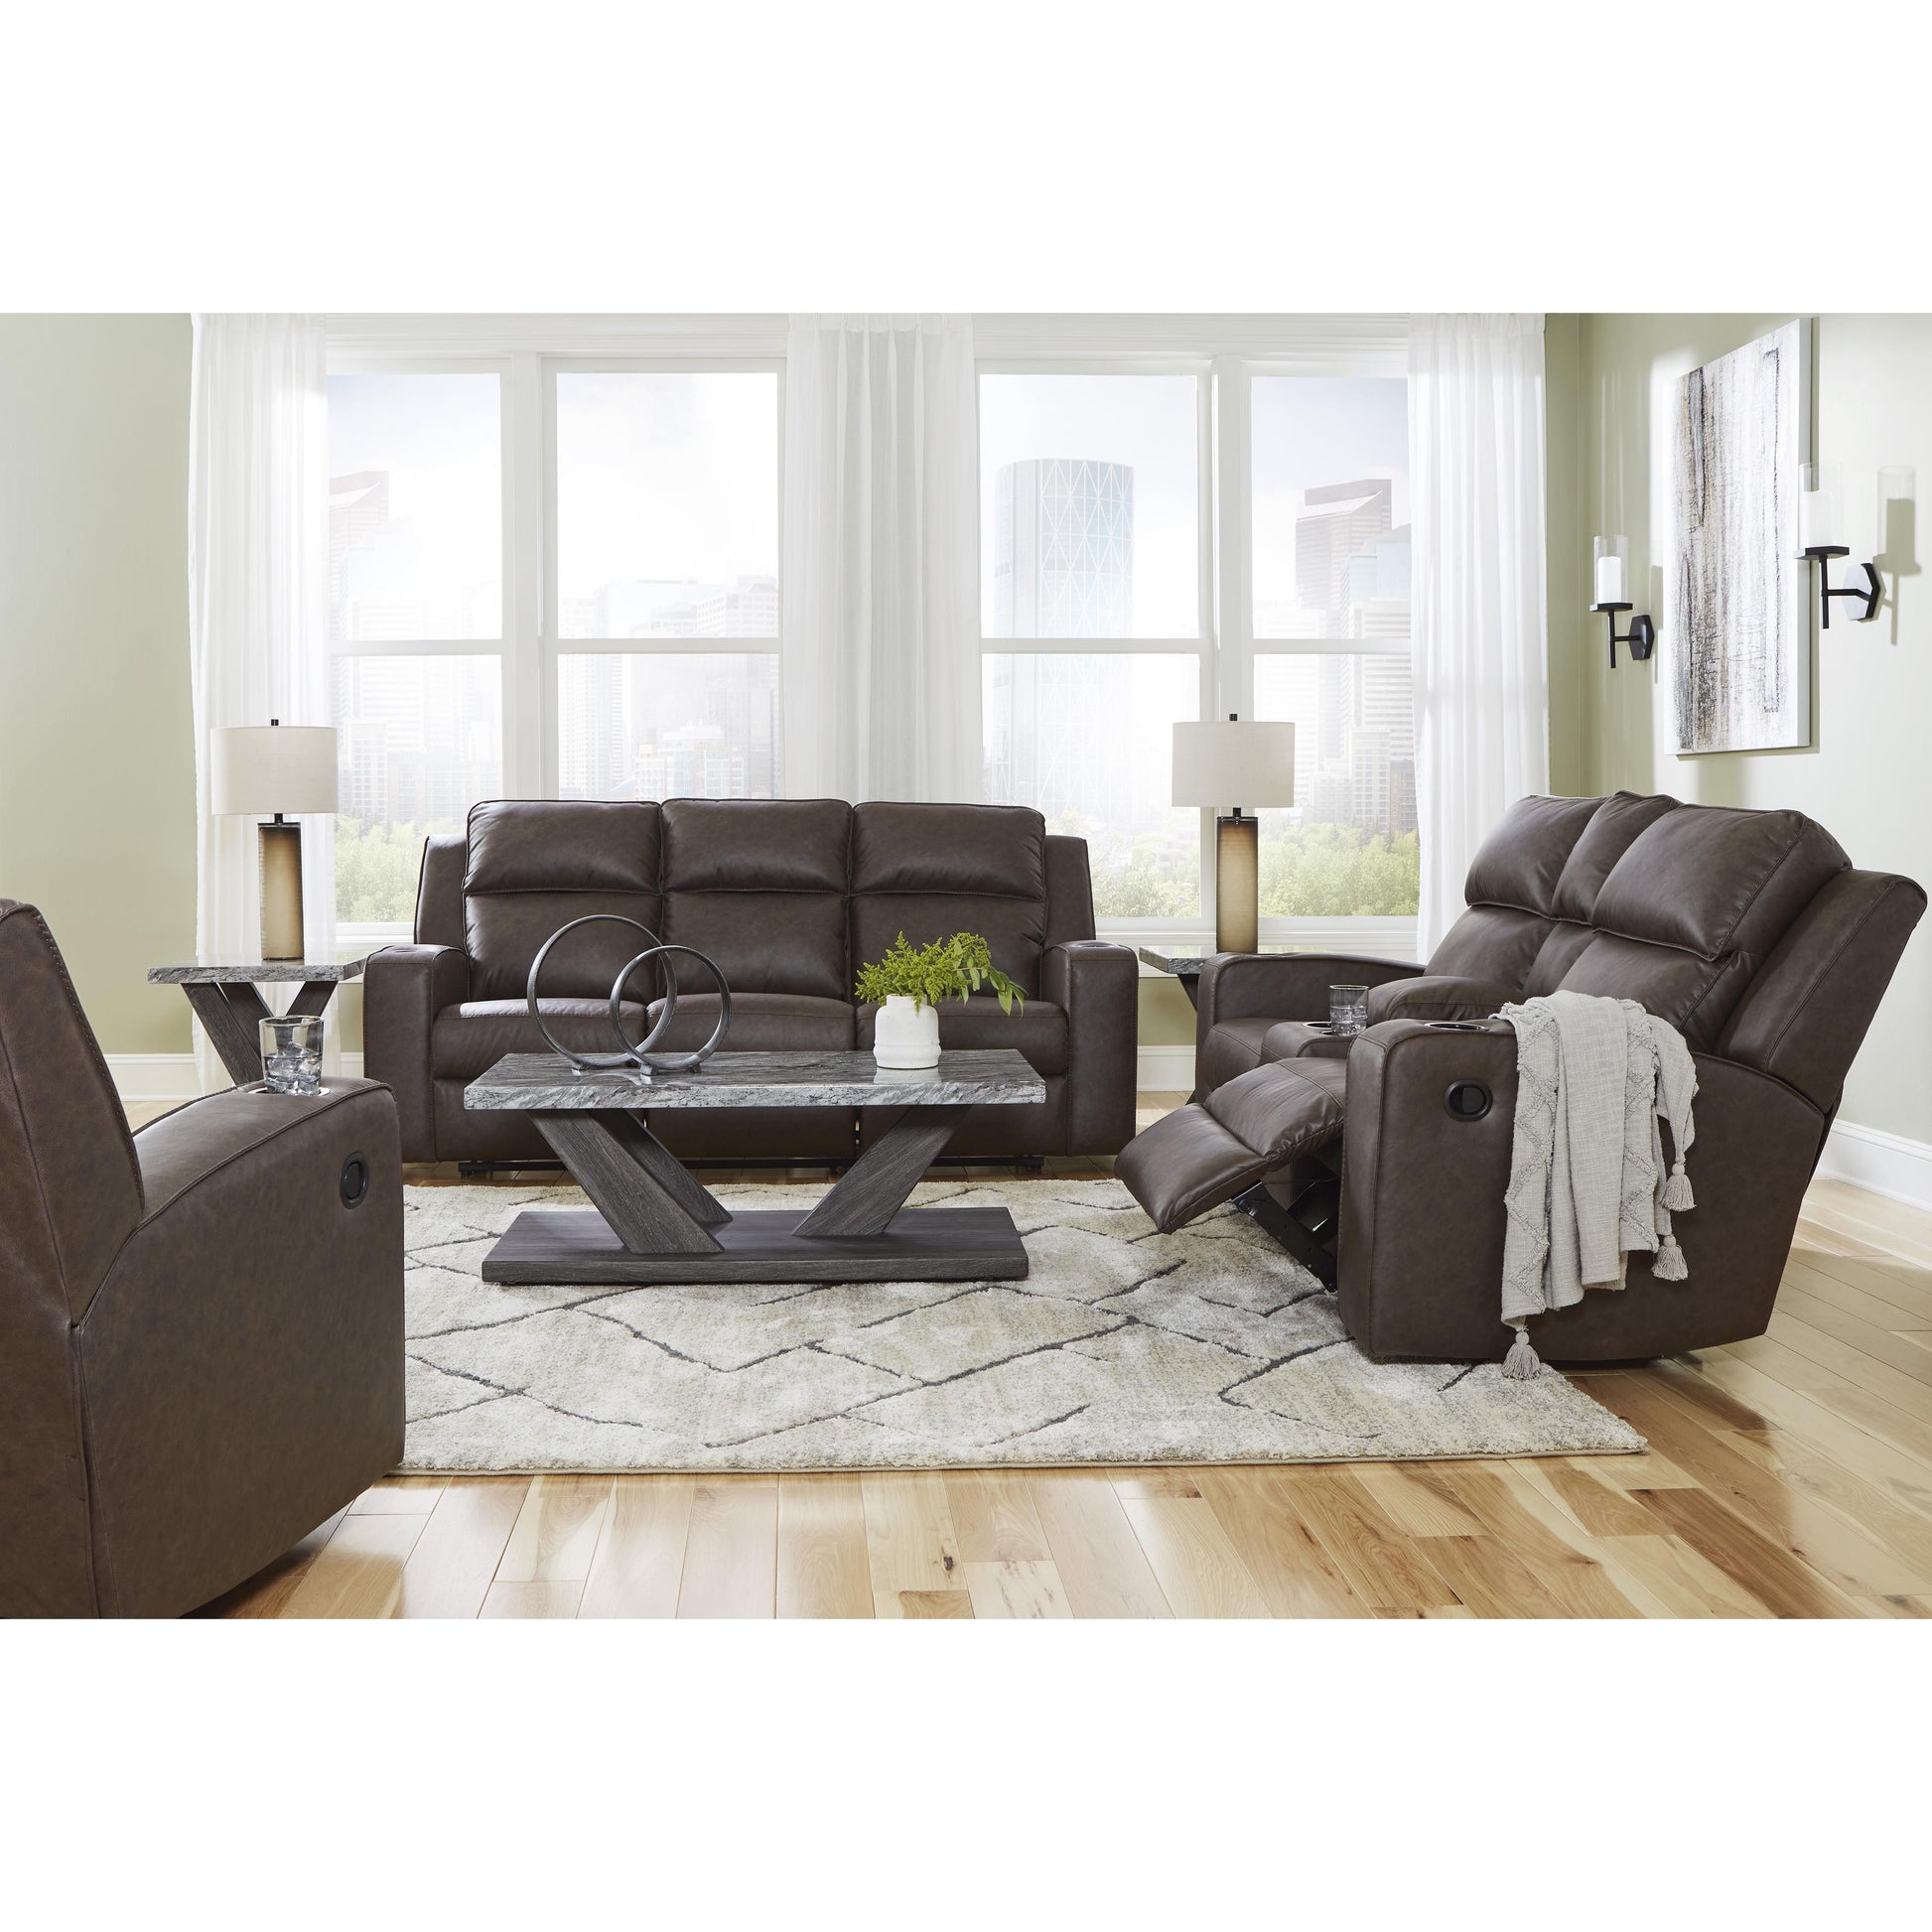 Signature Design by Ashley Lavenhorne Reclining Leather Look Loveseat 6330694 IMAGE 15